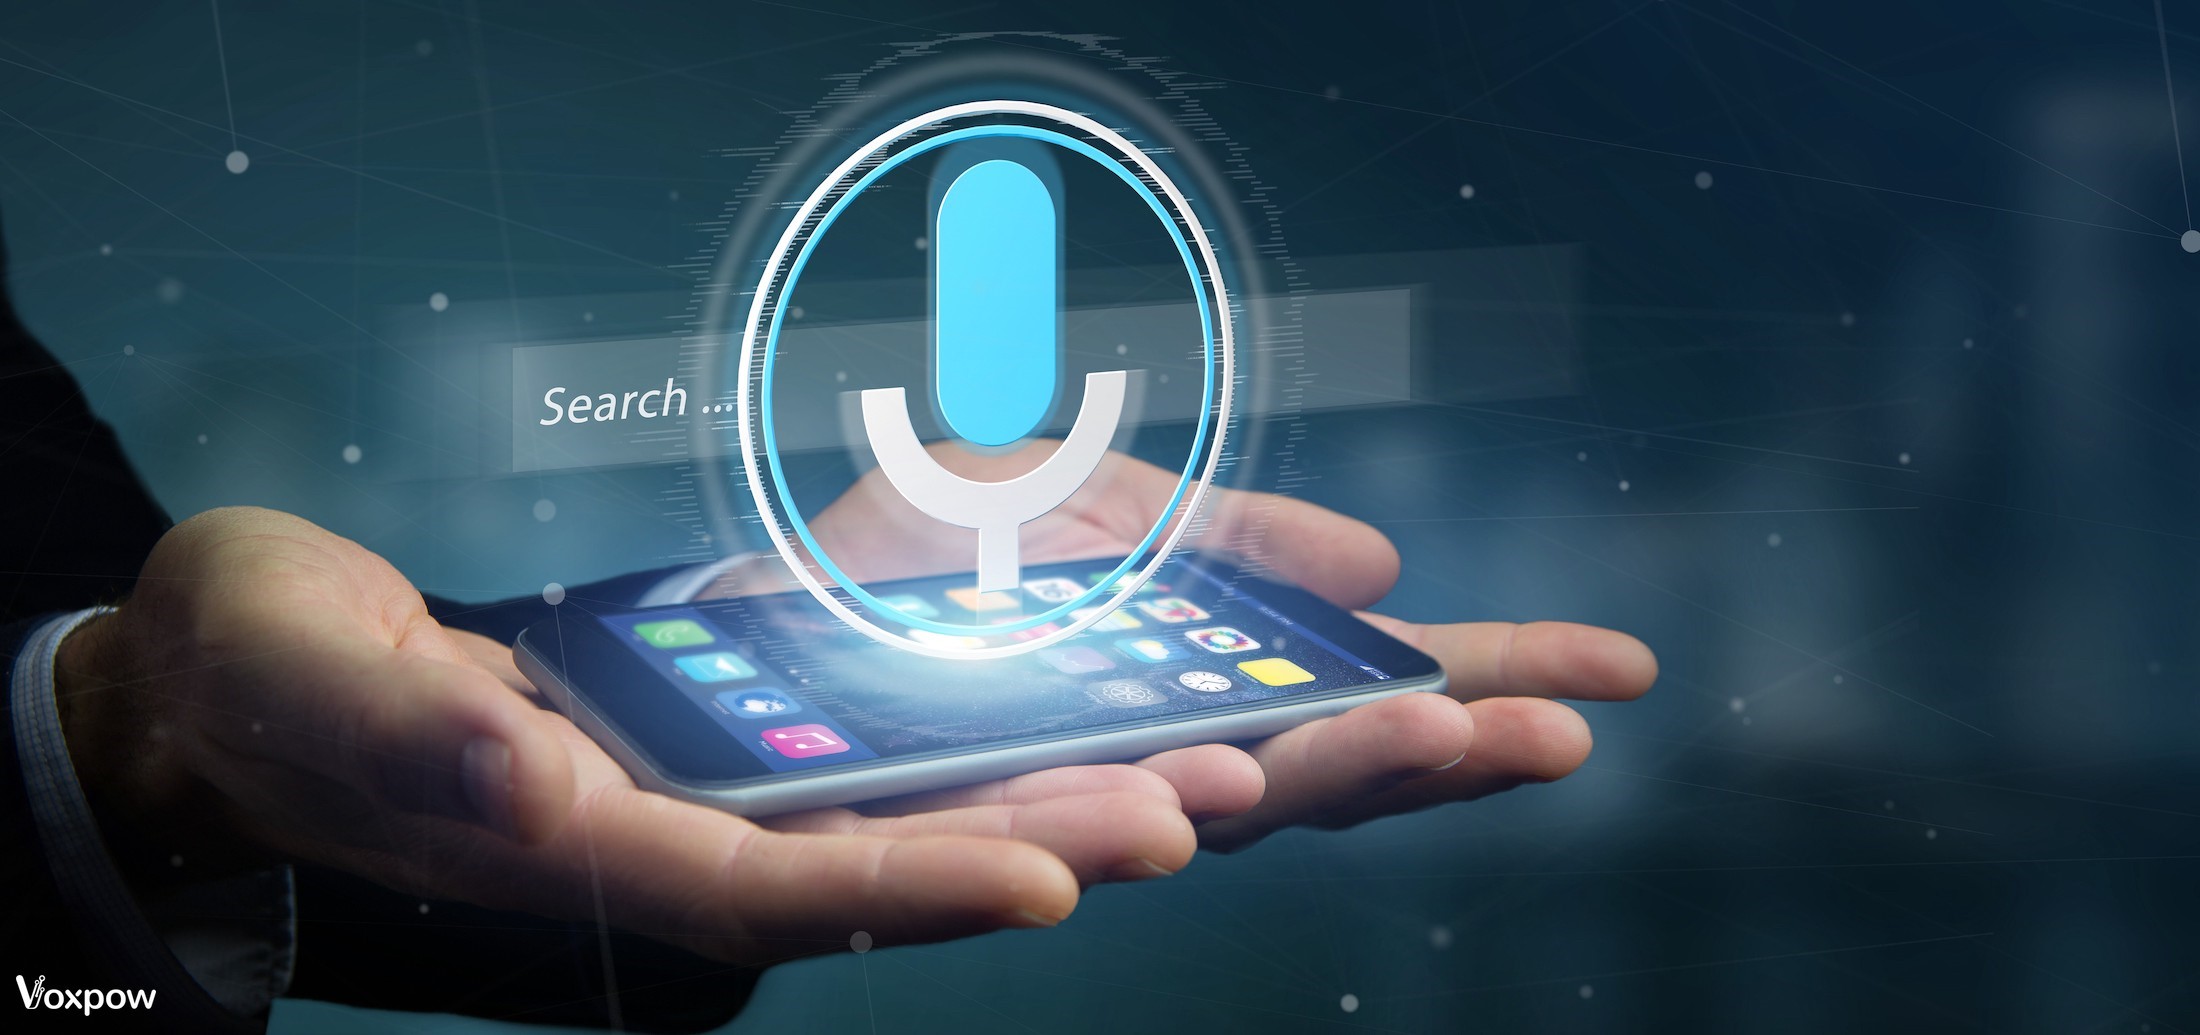 examples of speech recognition technology